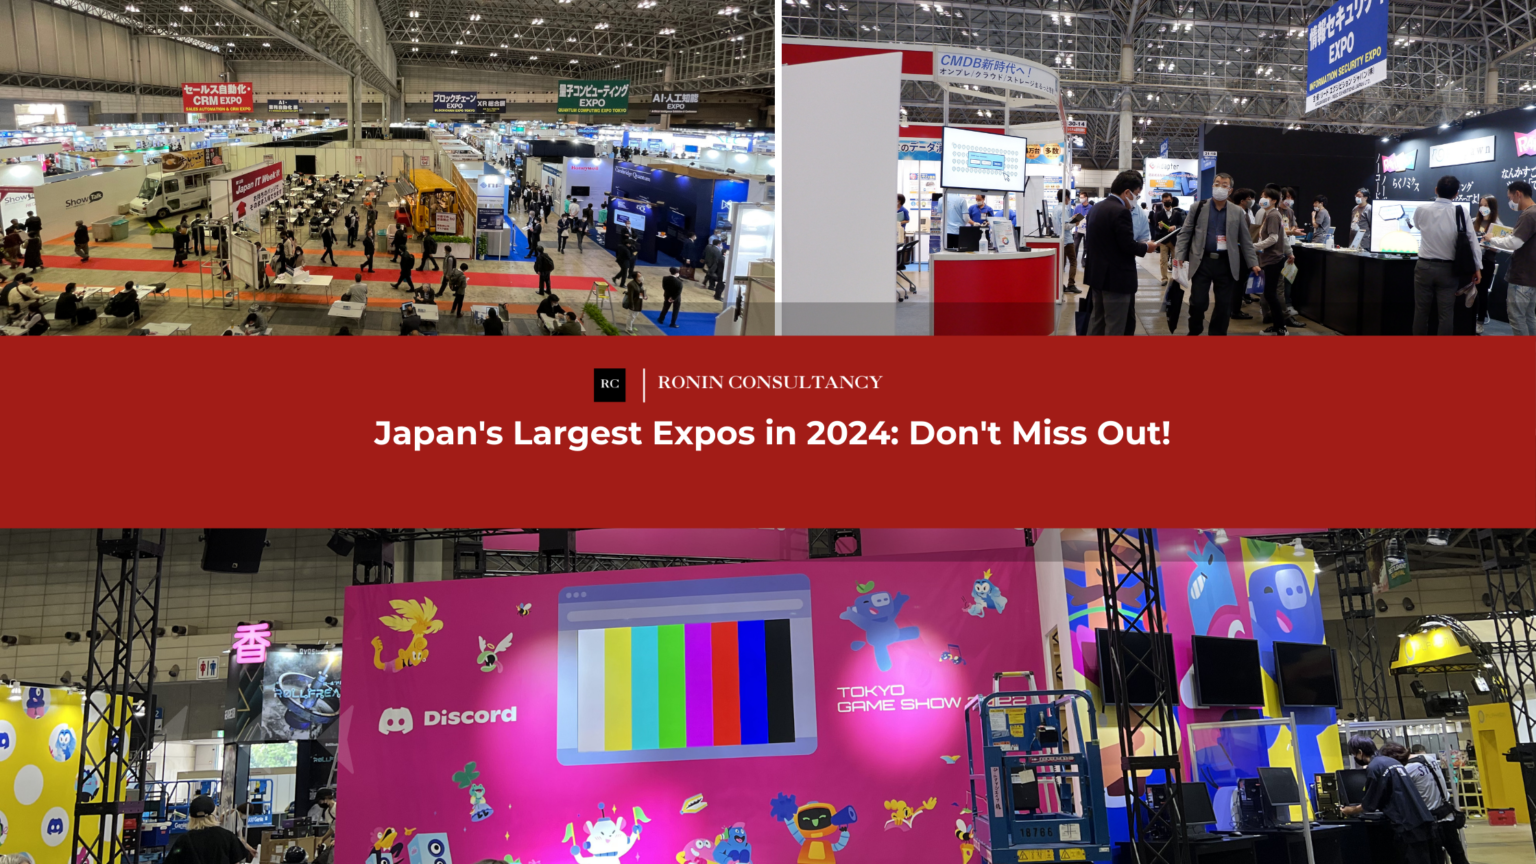 Japan's Largest Expos in 2024 Don't Miss Out Ronin Consultancy